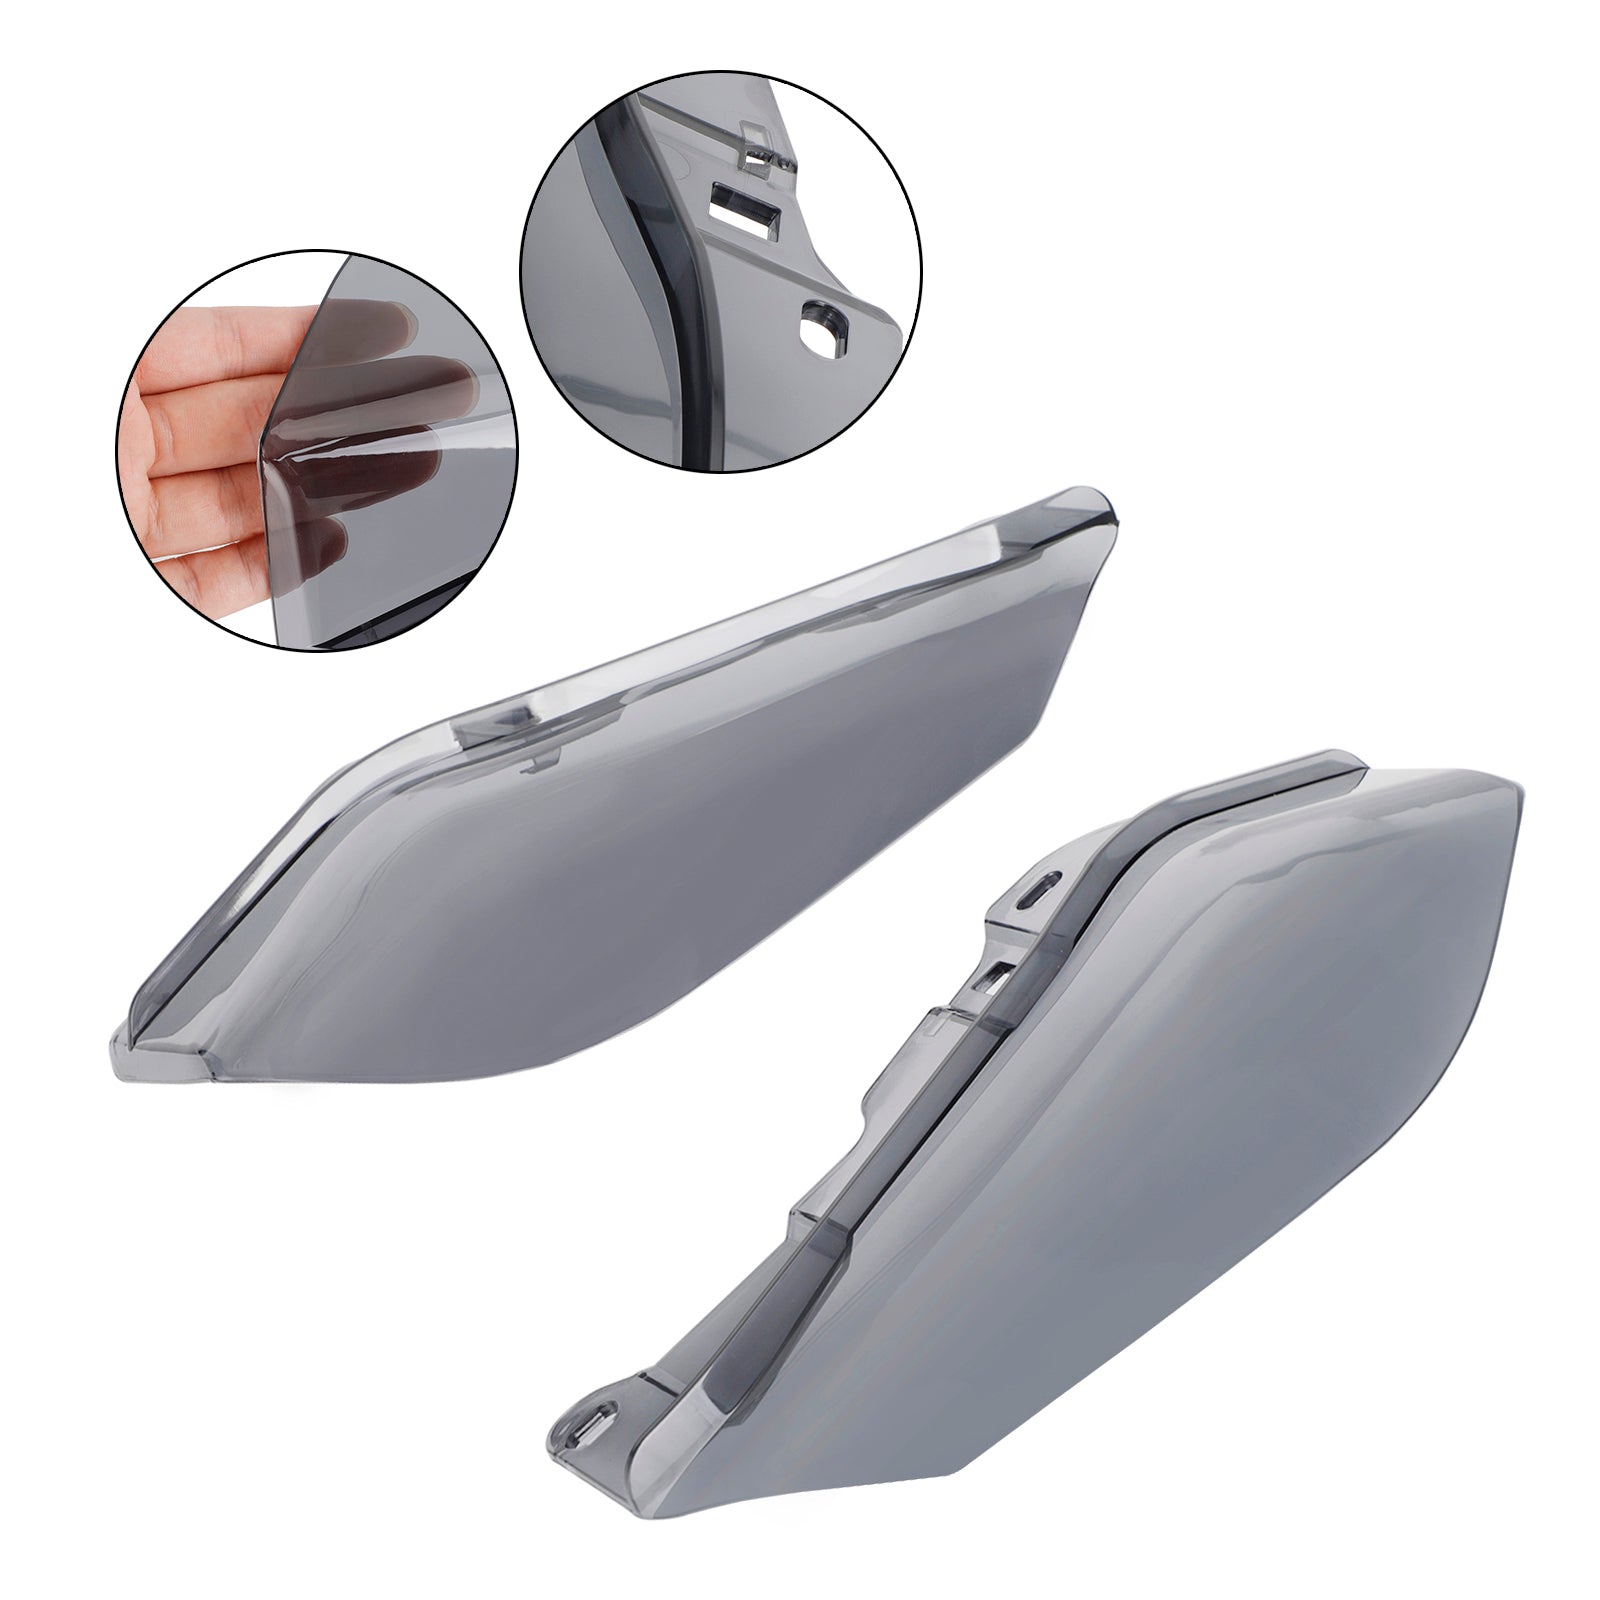 Mid-Frame Air Heat Deflector Trim Shield fit for 09-16 Touring and Trike models